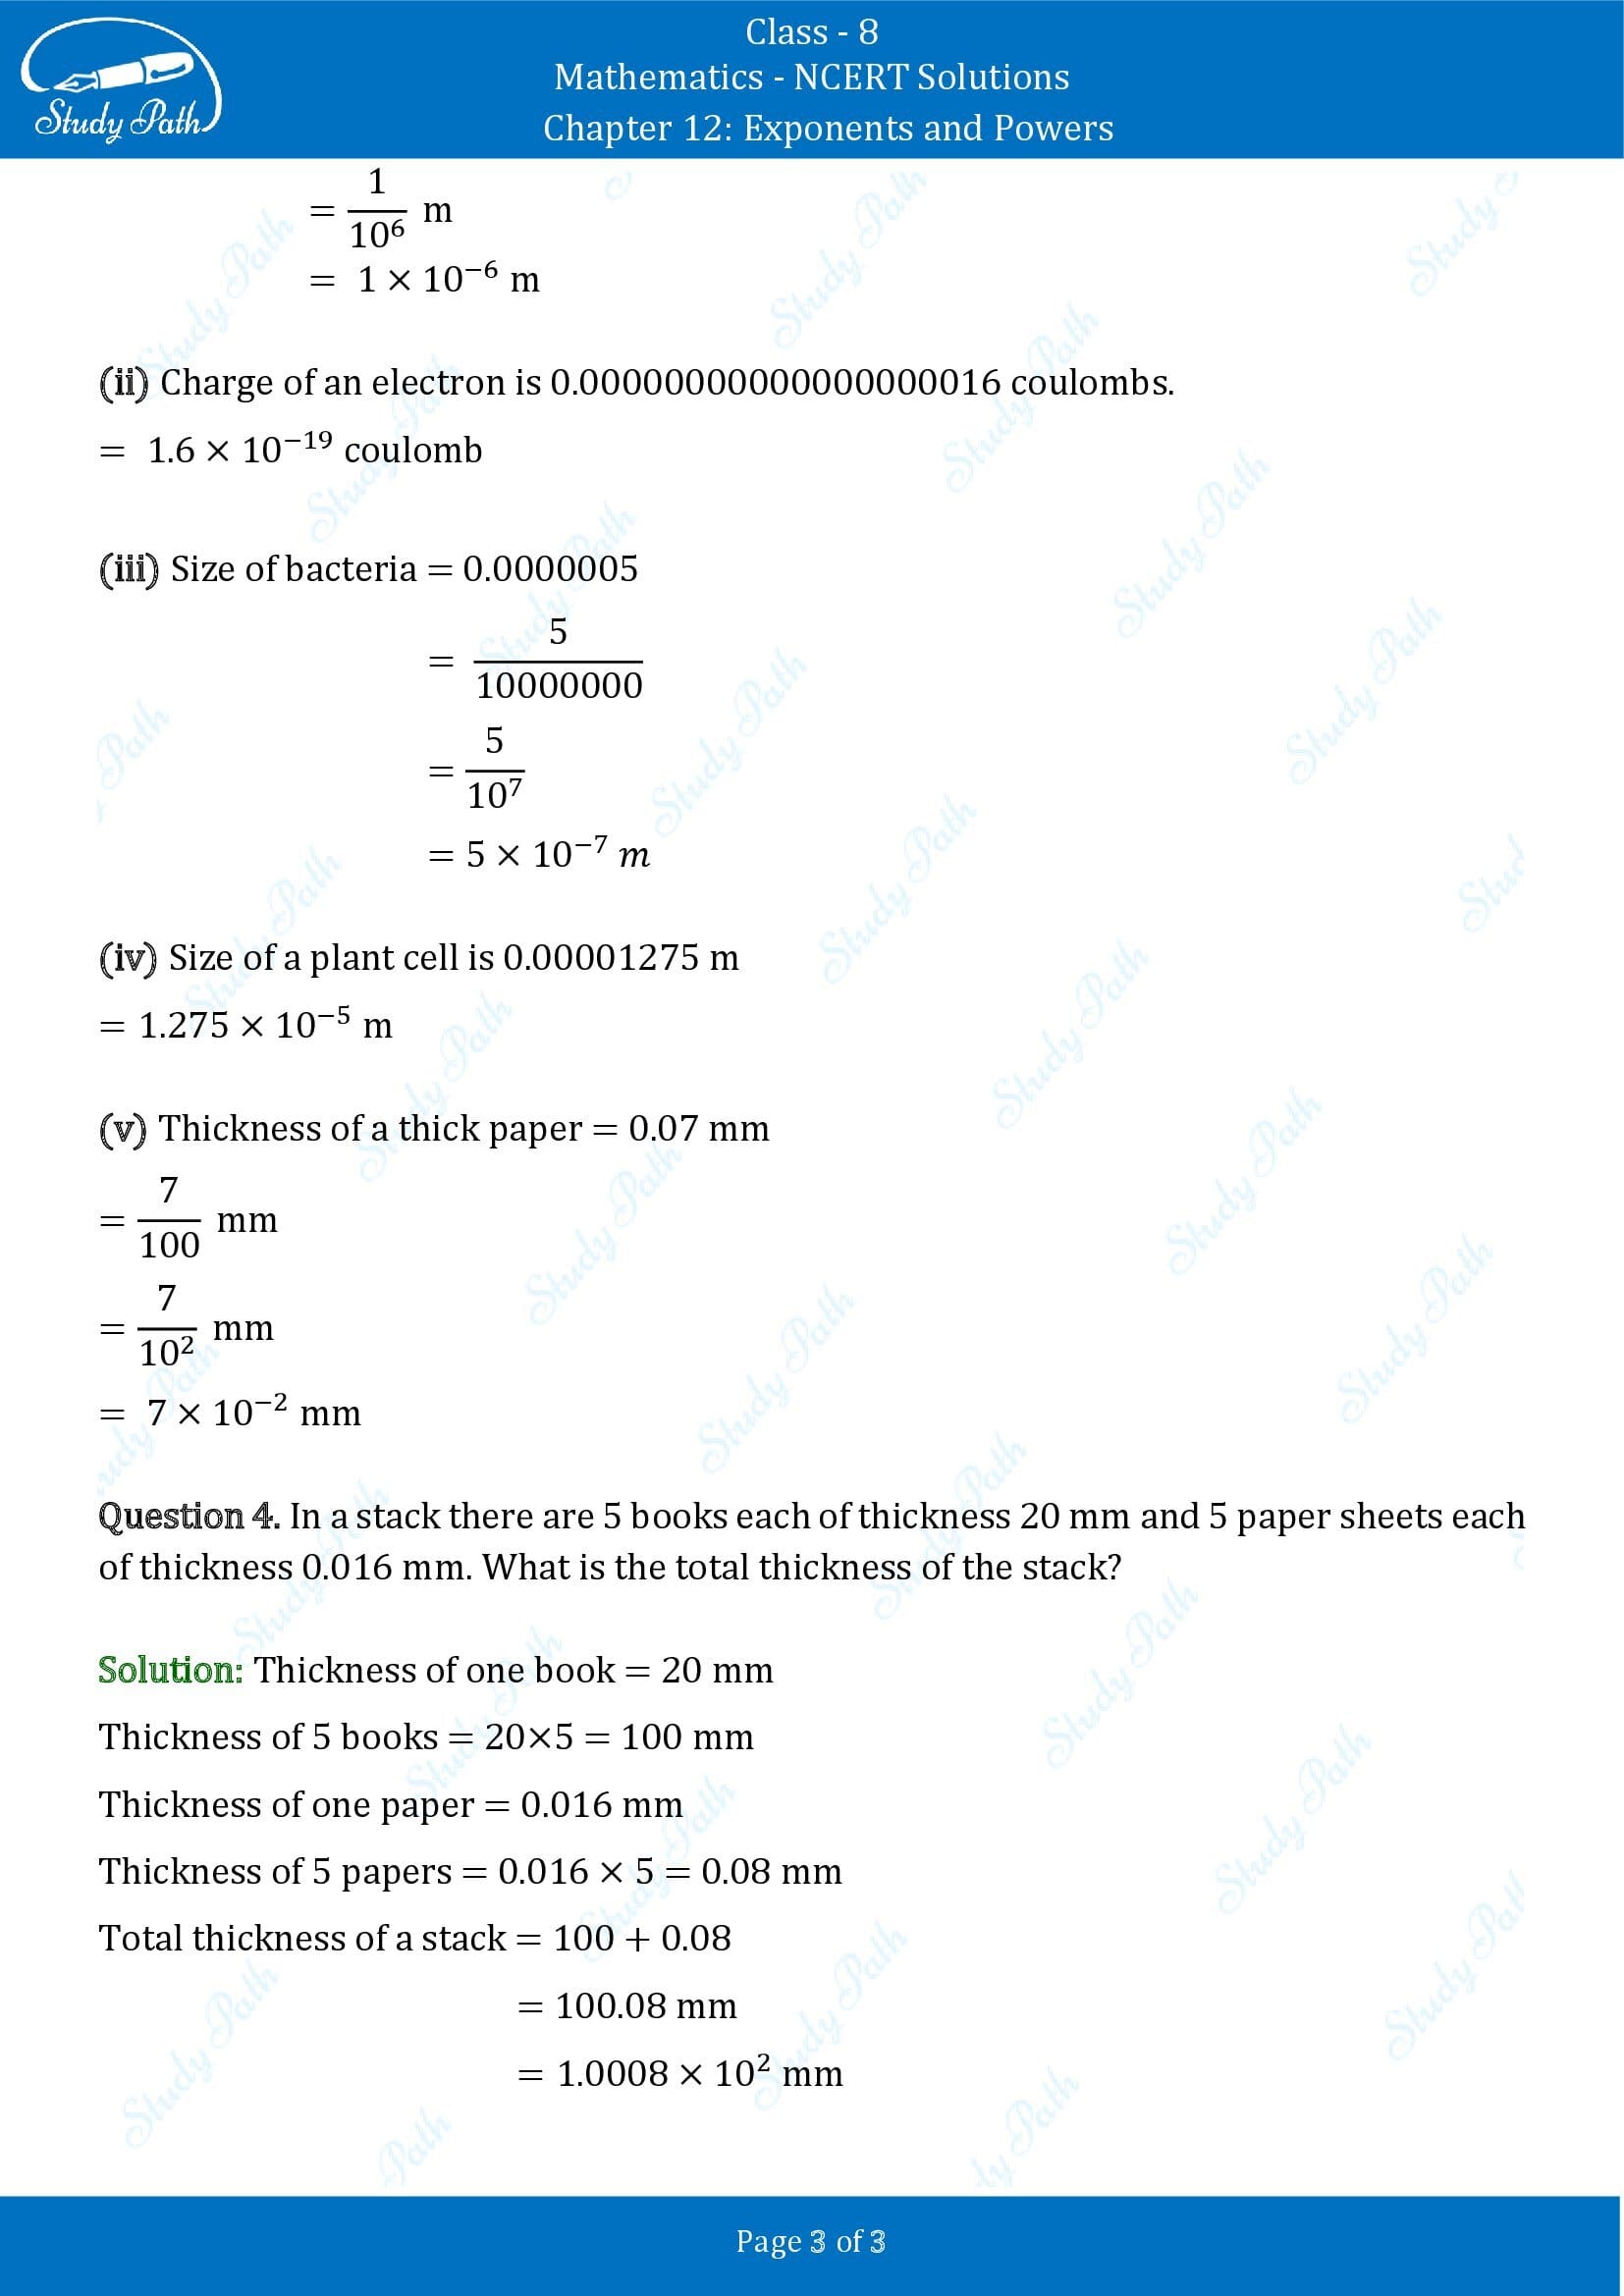 NCERT Solutions for Class 8 Maths Chapter 12 Exponents and Powers Exercise 12.2 00003